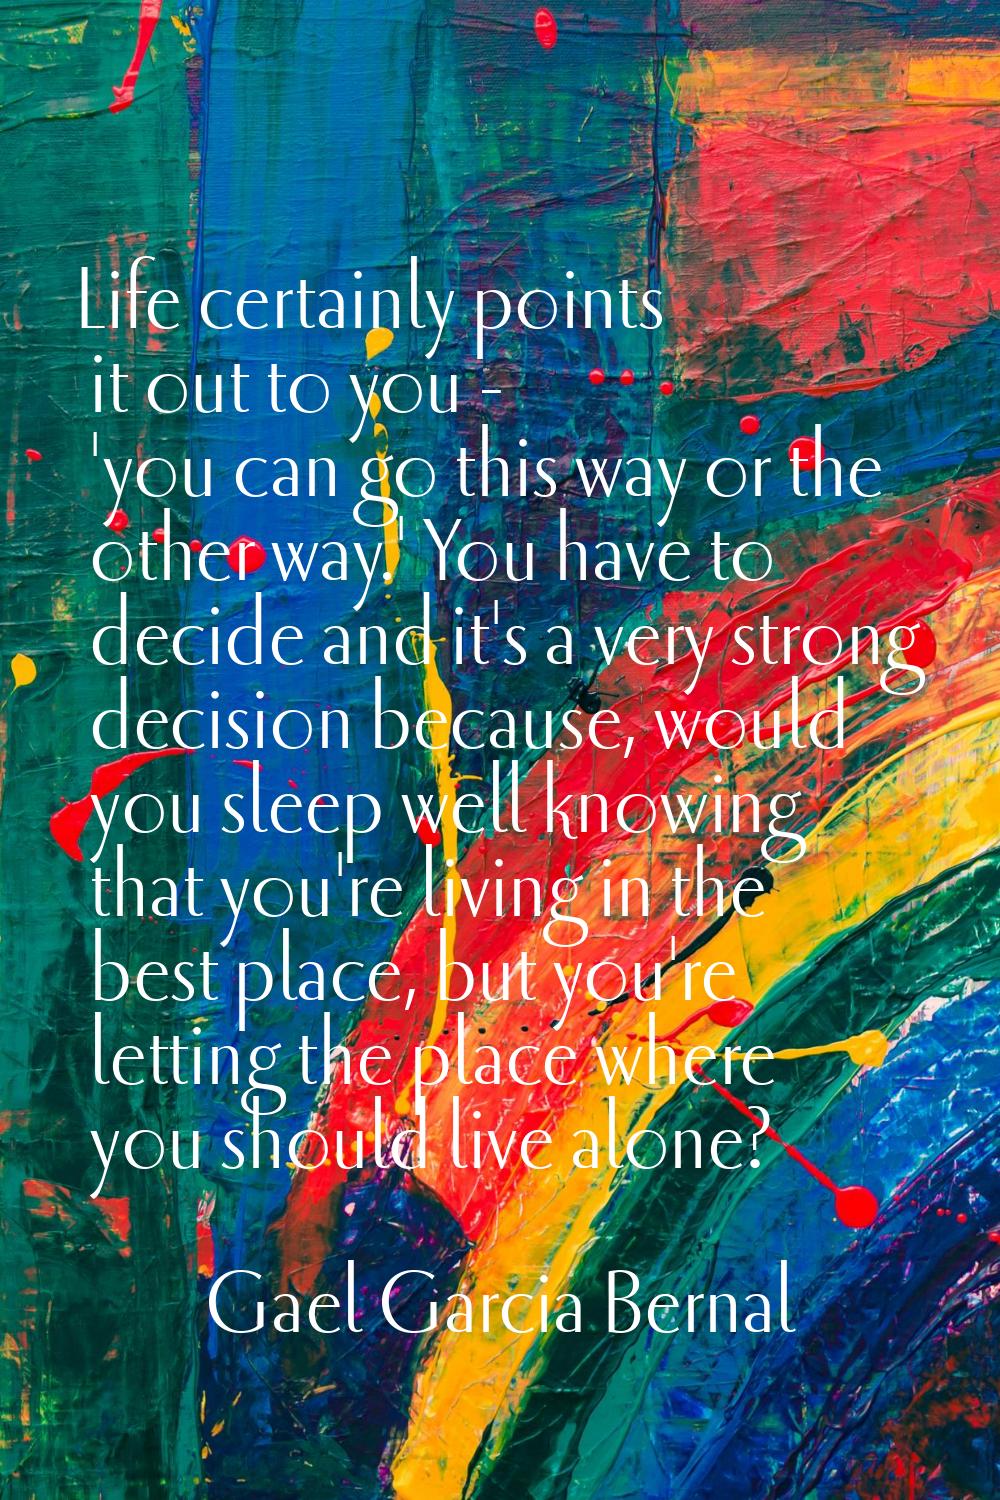 Life certainly points it out to you - 'you can go this way or the other way.' You have to decide an